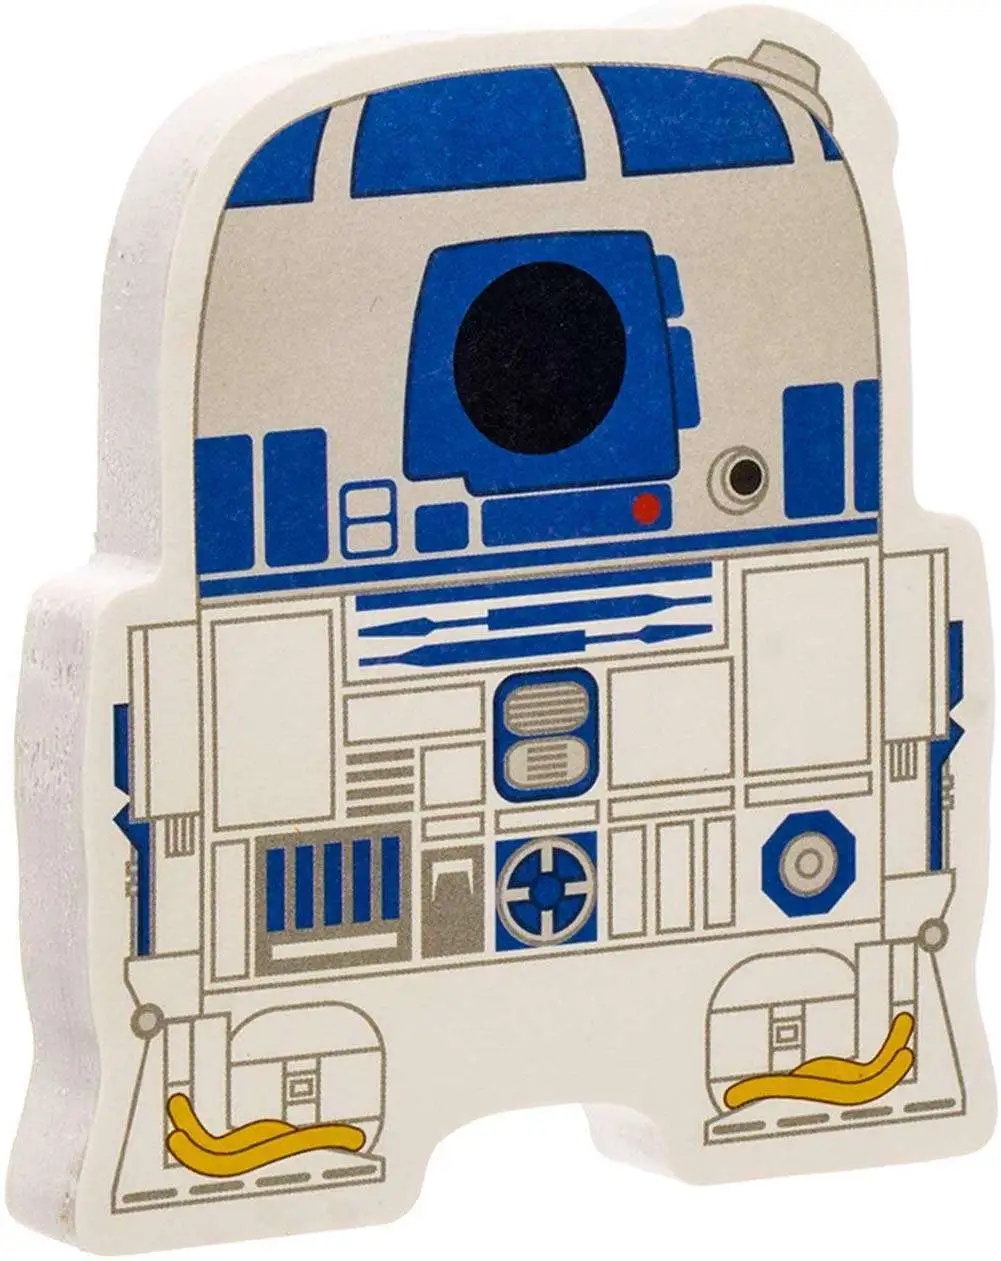 Funko Star Wars R2-D2 Exclusive Sticky Notepad Dagobah - ToyWiz